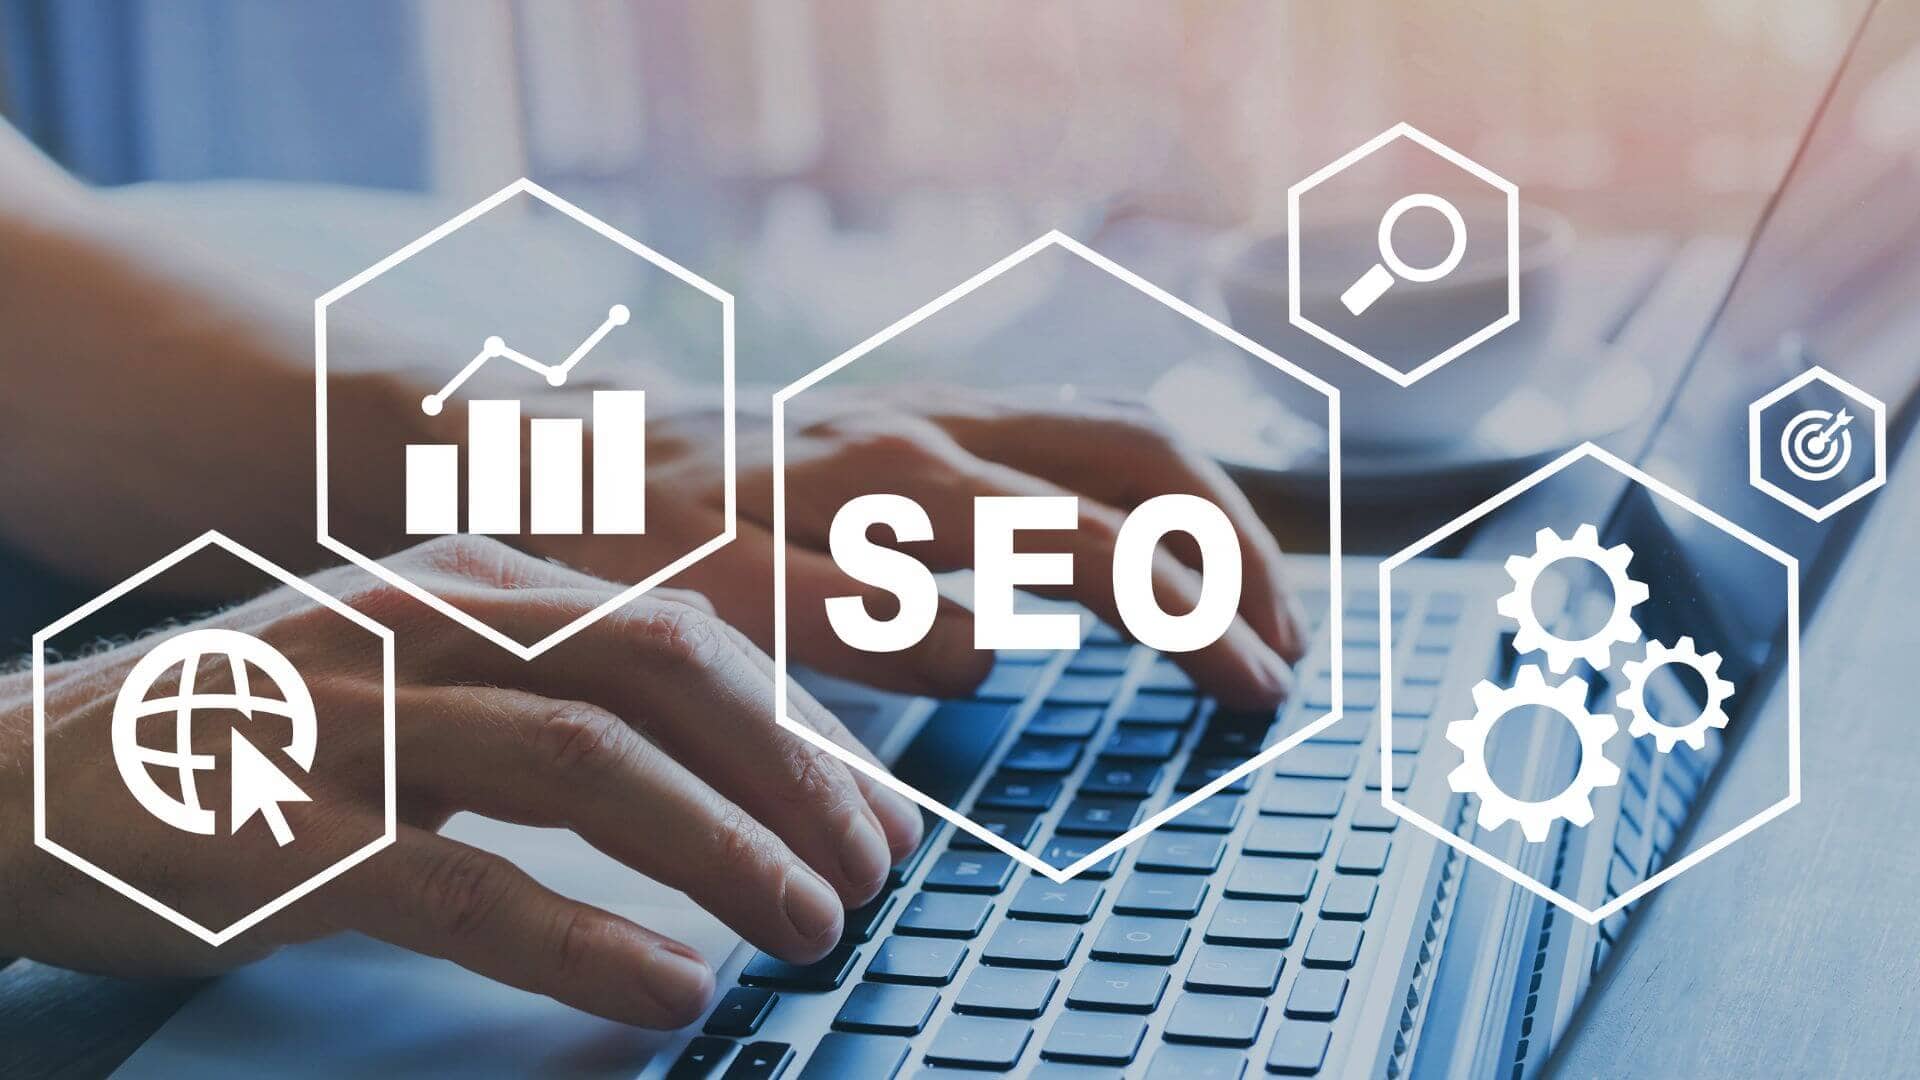 An image showing SEO concept with a human hand on a keyboard doing SEO audit of a website